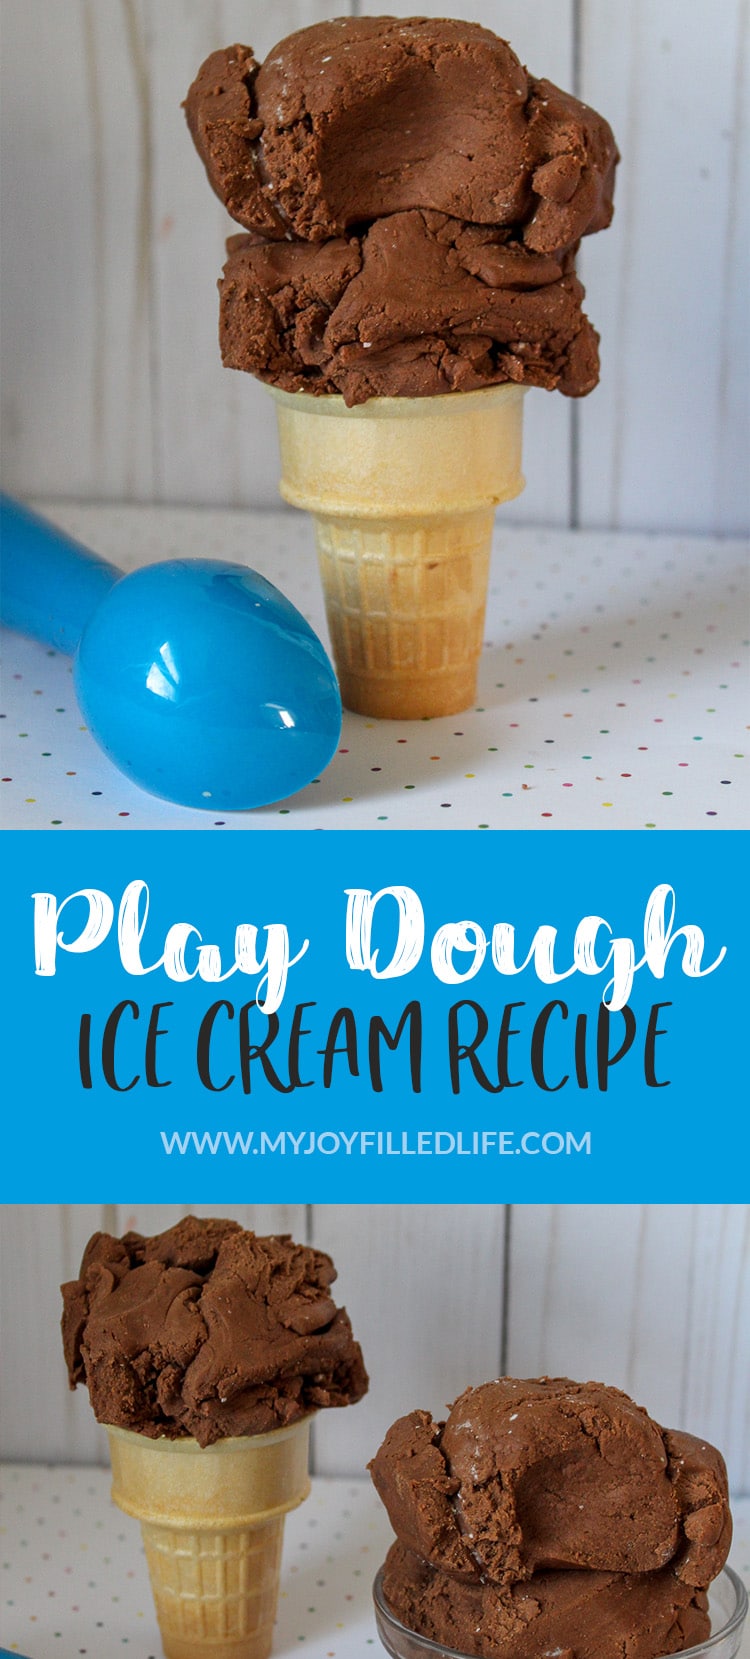 Kids will love having a pretend ice cream party or ice cream parlor with this easy to make play dough ice cream recipe - a great summer activity. #pretendplay #playdough #playdoughrecipe #homemadeplaydough